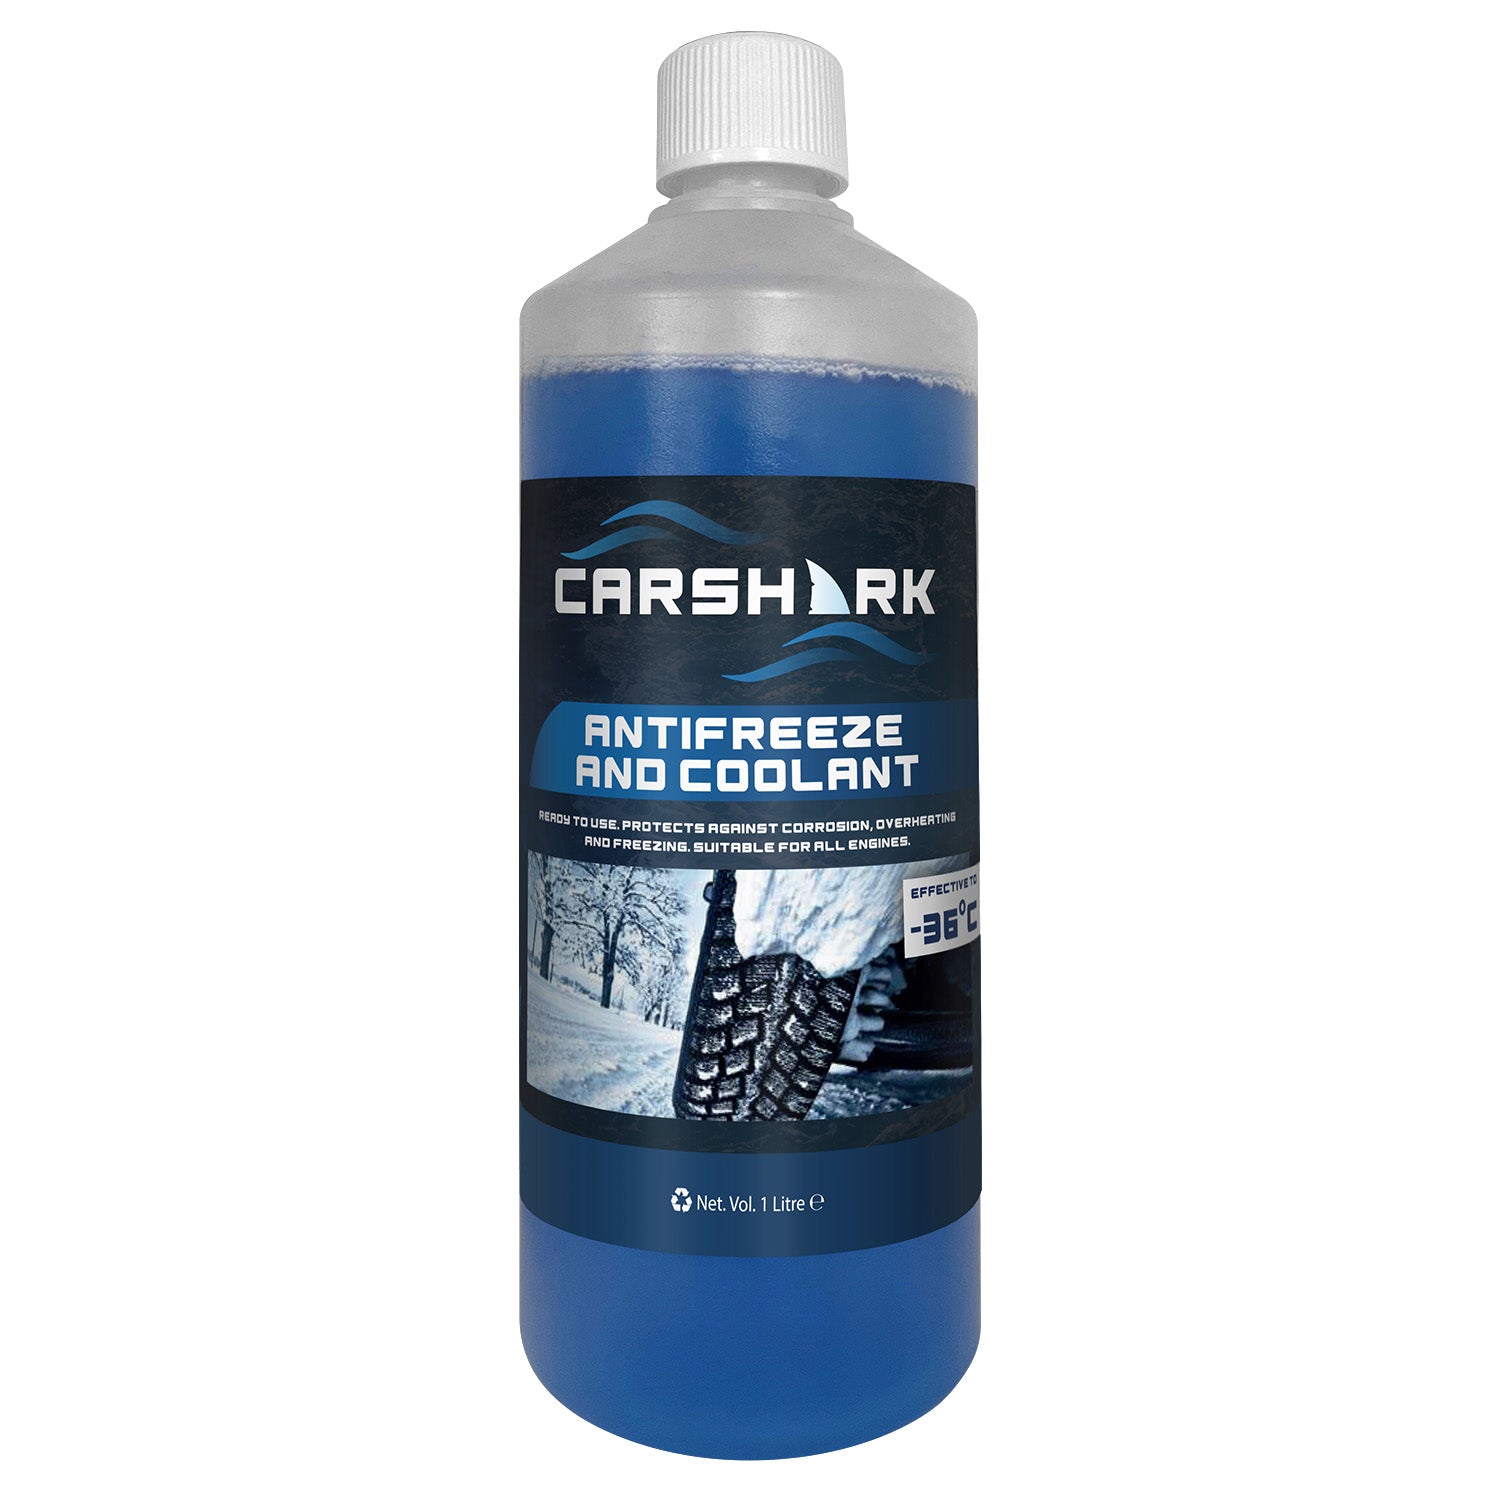 CARSHARK Antifreeze and Coolant 1 Litre -36°C Ready to use